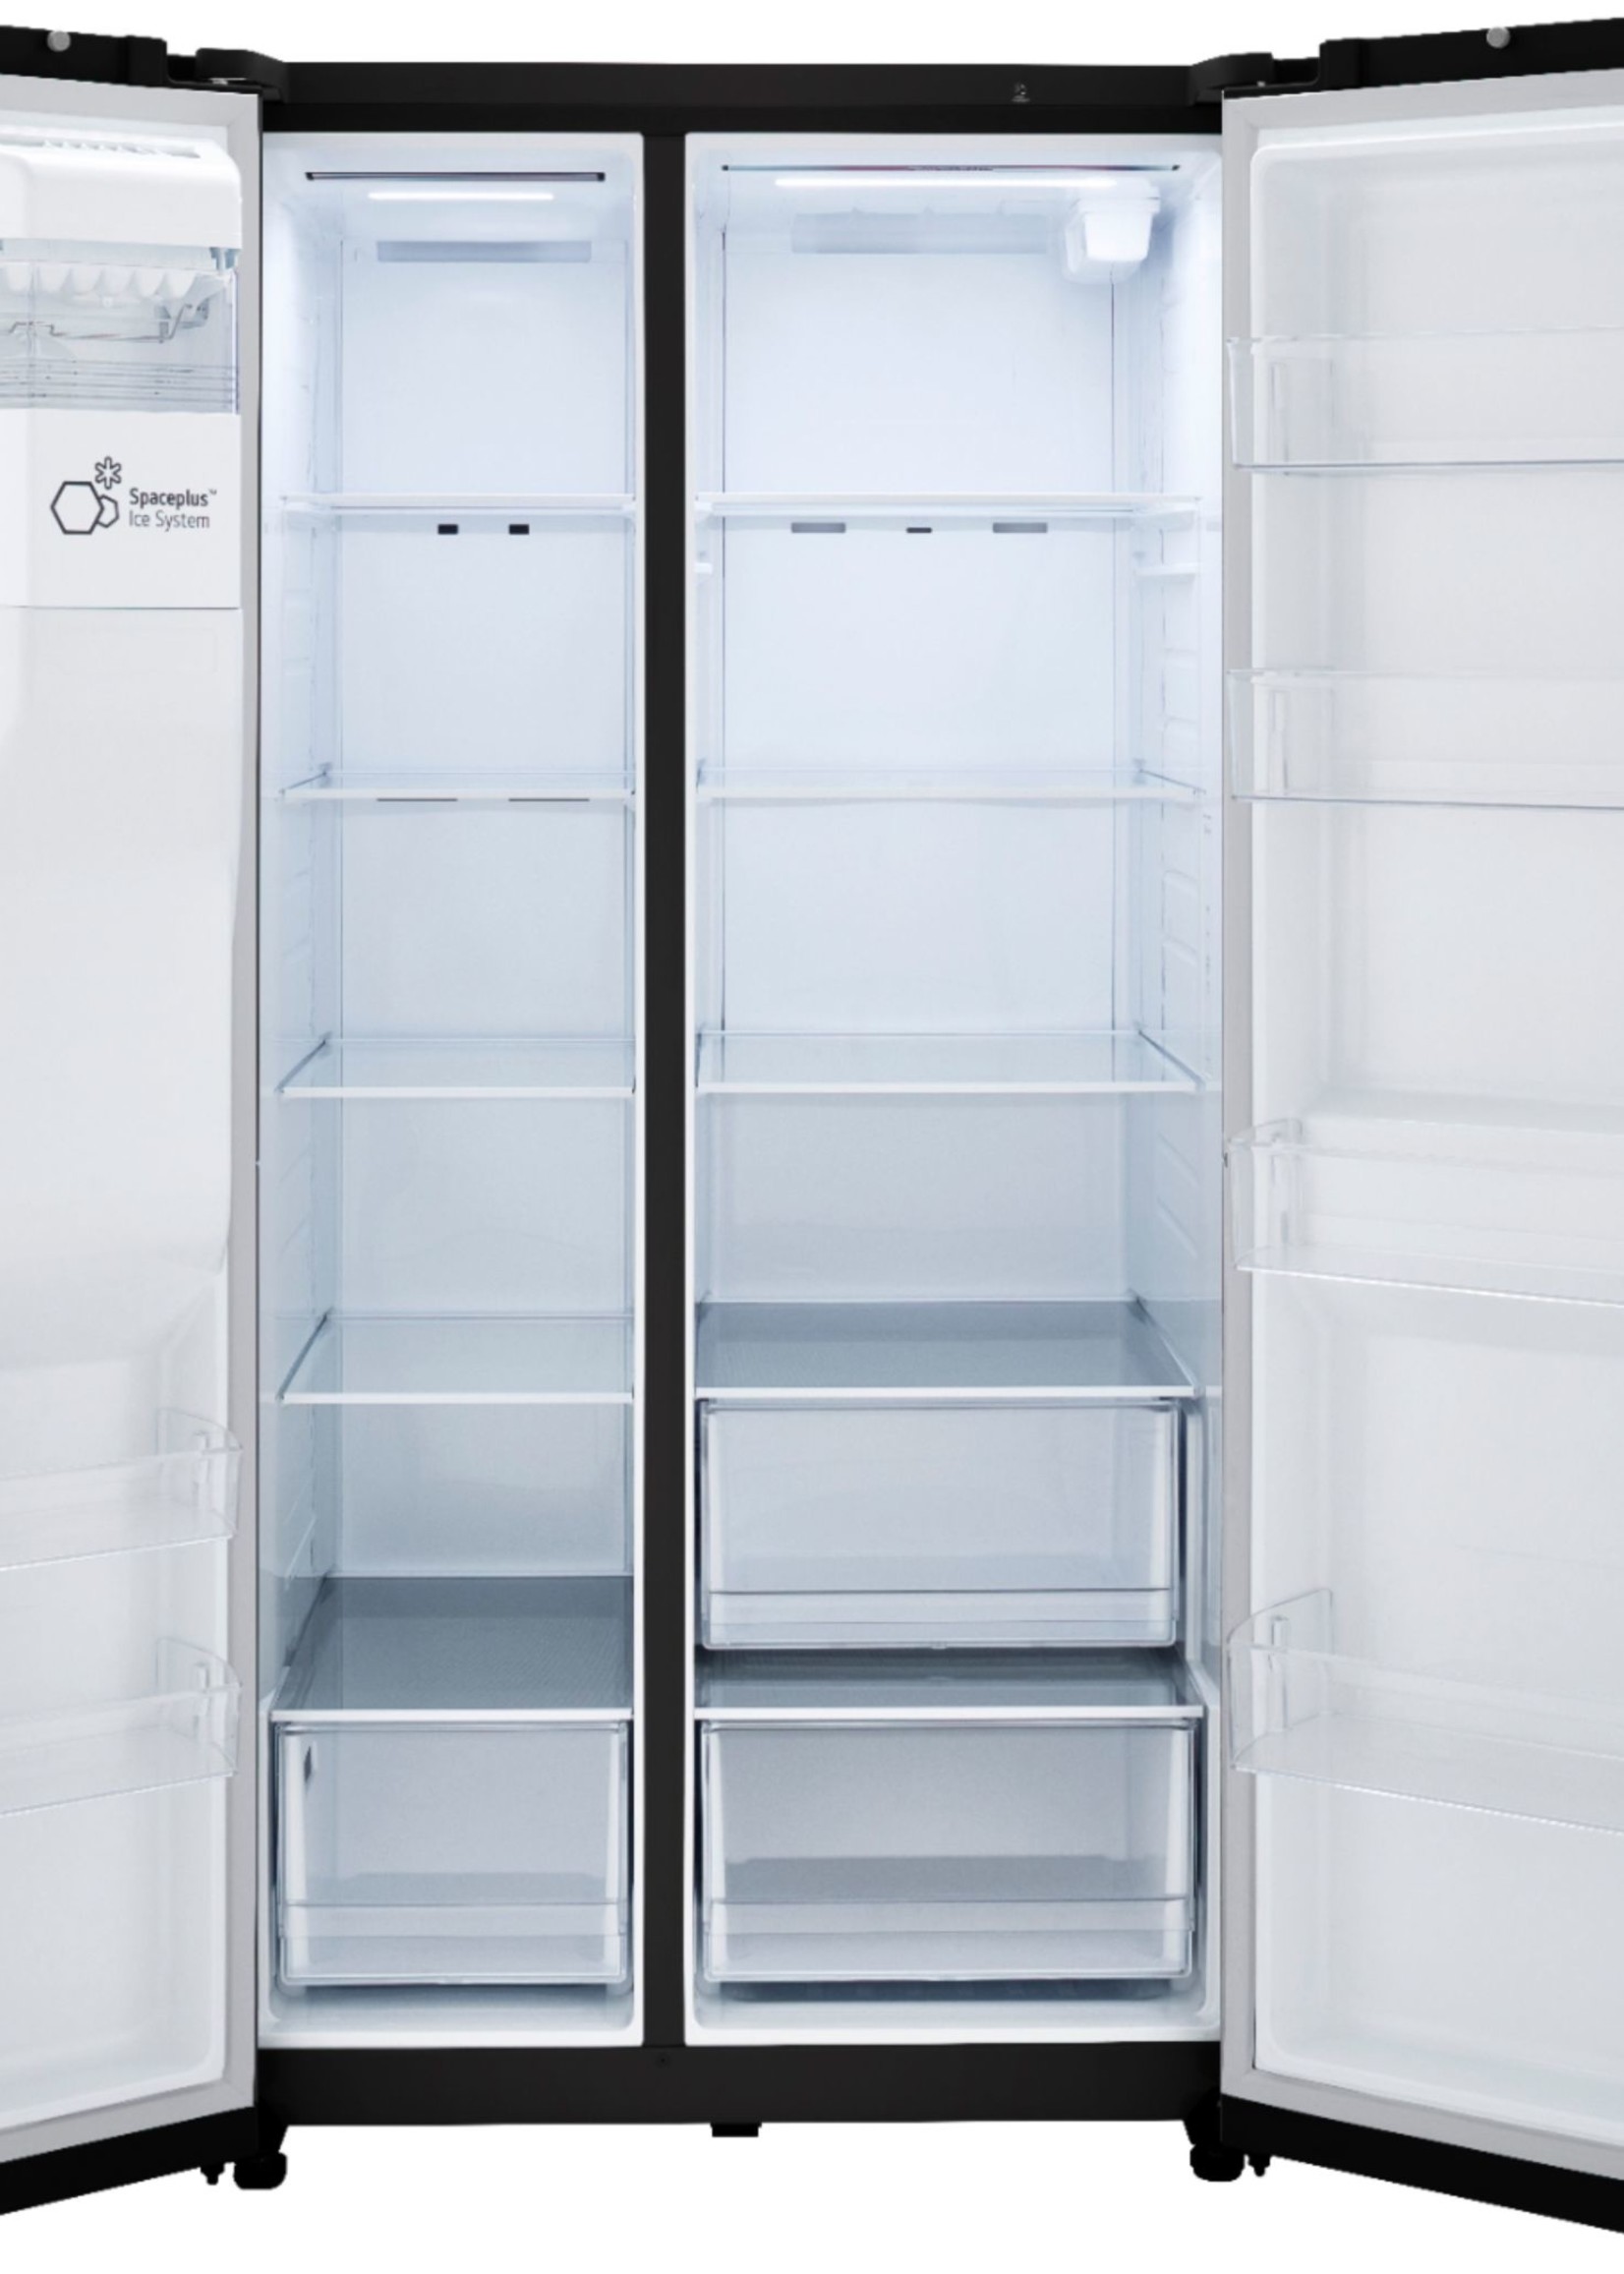 LG LG  LRSXS2706B 27.2 cu ft Side by Side Refrigerator with SpacePlus Ice - Smooth Black